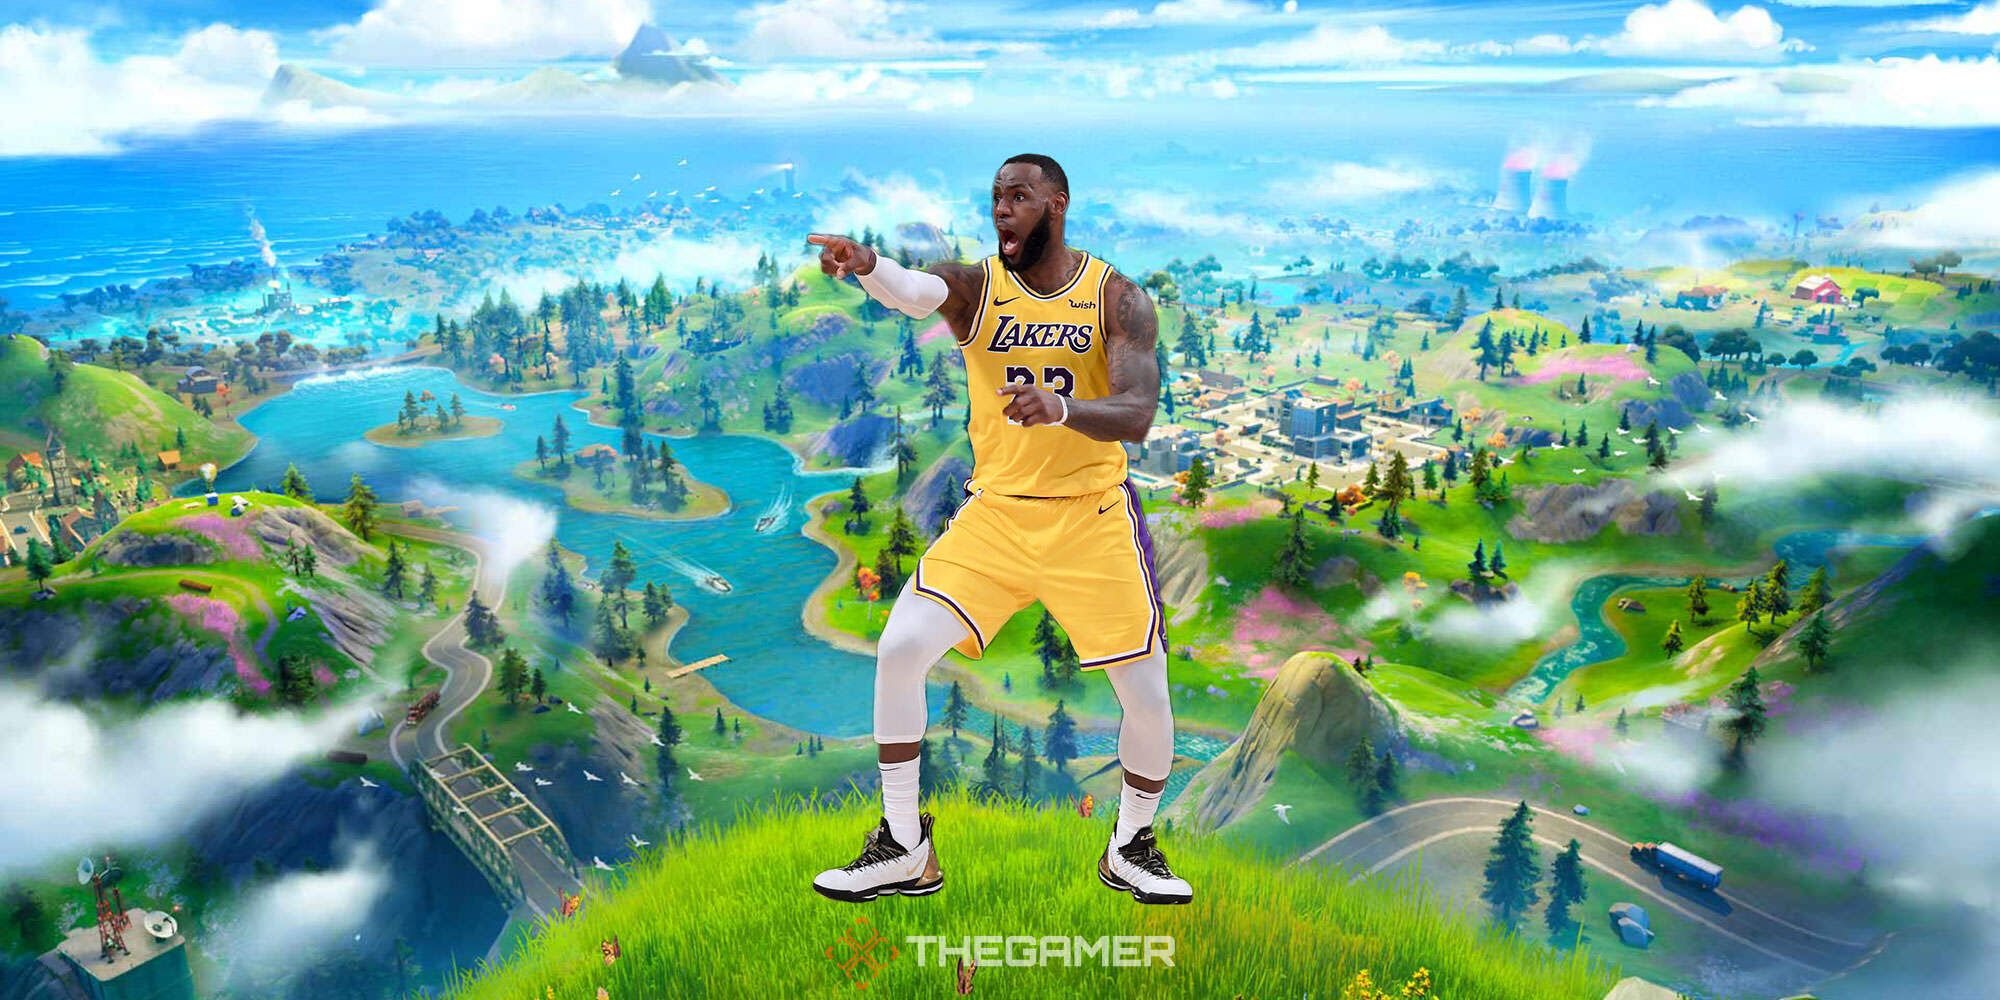 The King Has Arrived: LeBron James Joins Fortnite's Icon Series